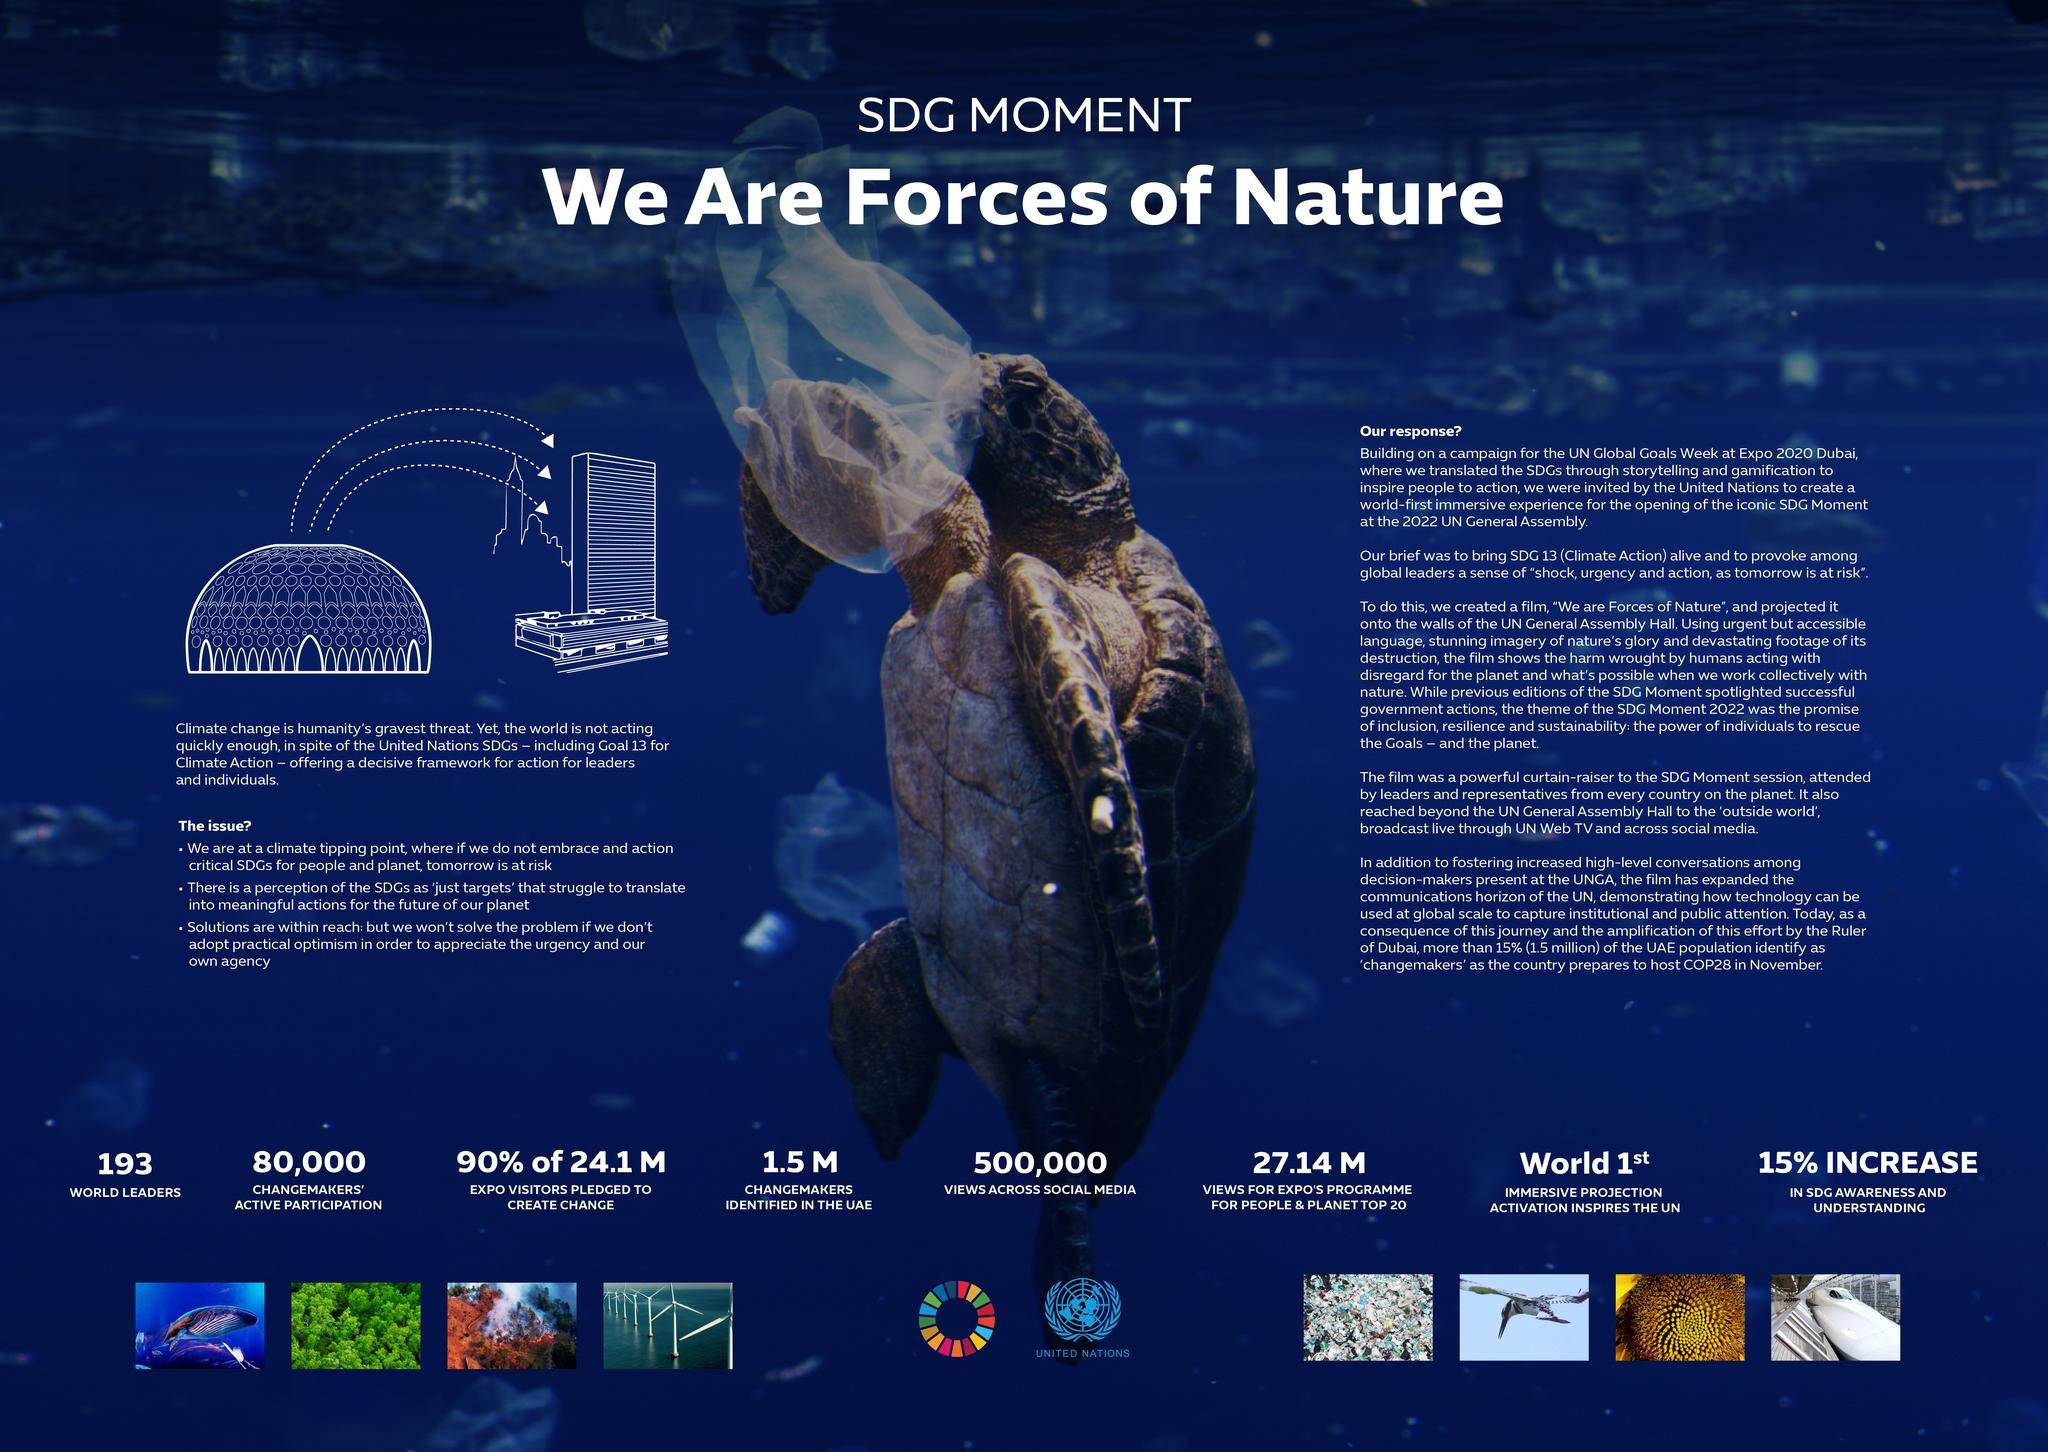 “We Are Forces of Nature”: SDG Moment Projection